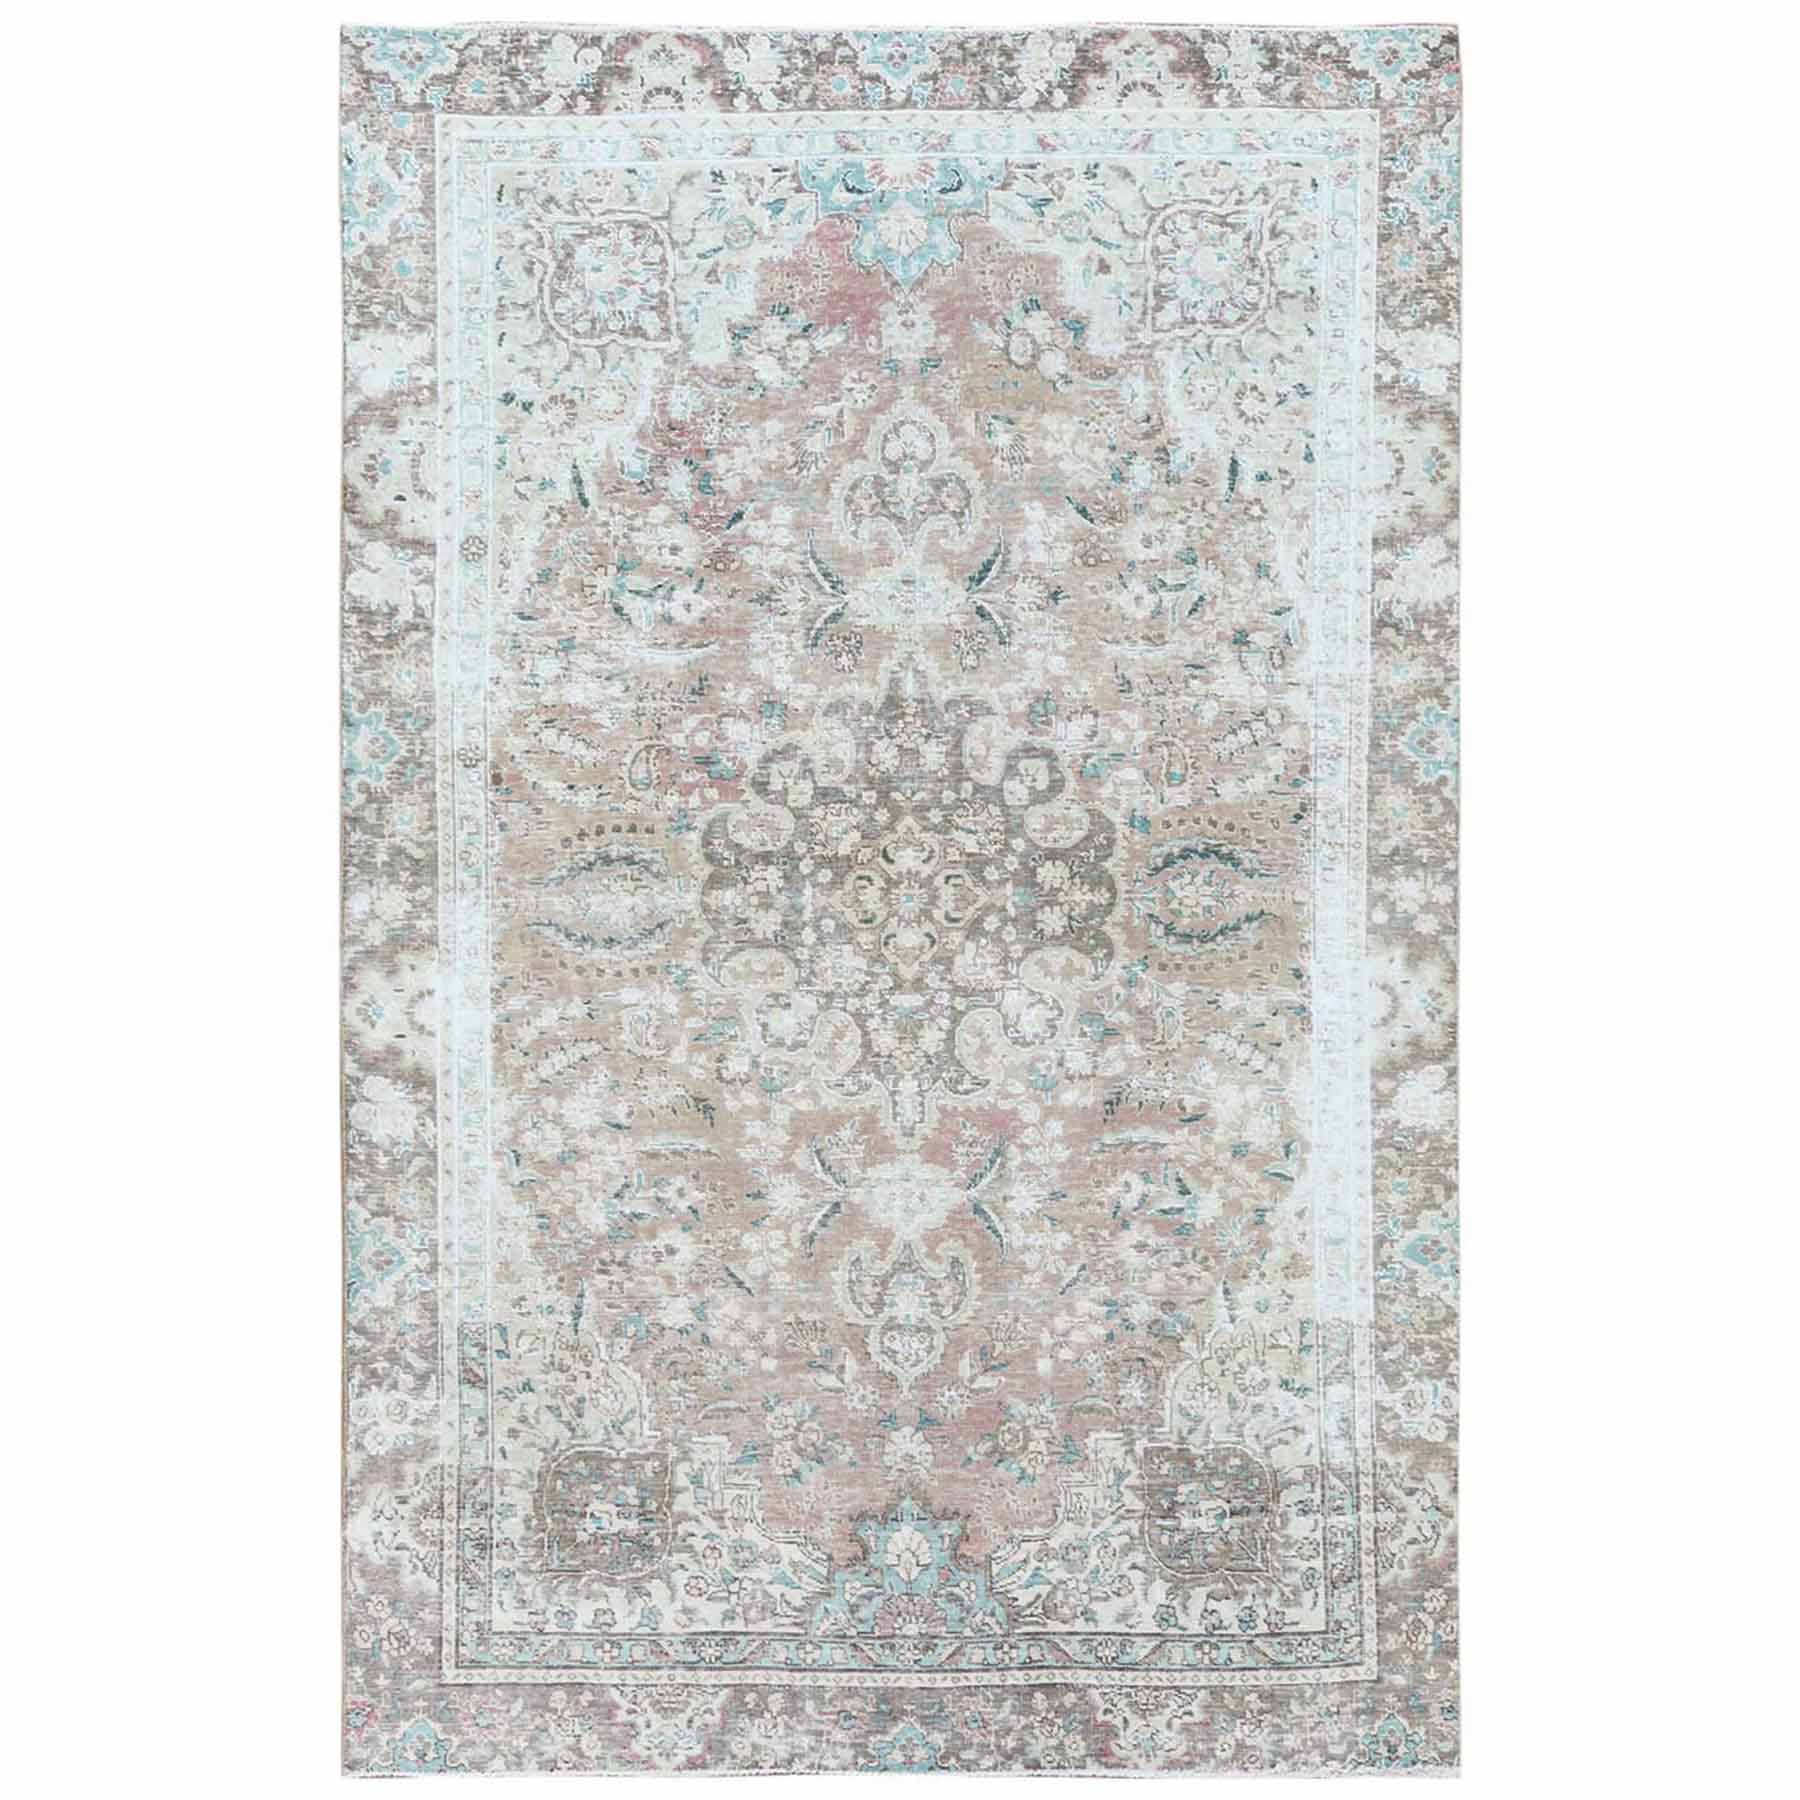 White-Wash-Vintage-Silver-Wash-Hand-Knotted-Rug-300965